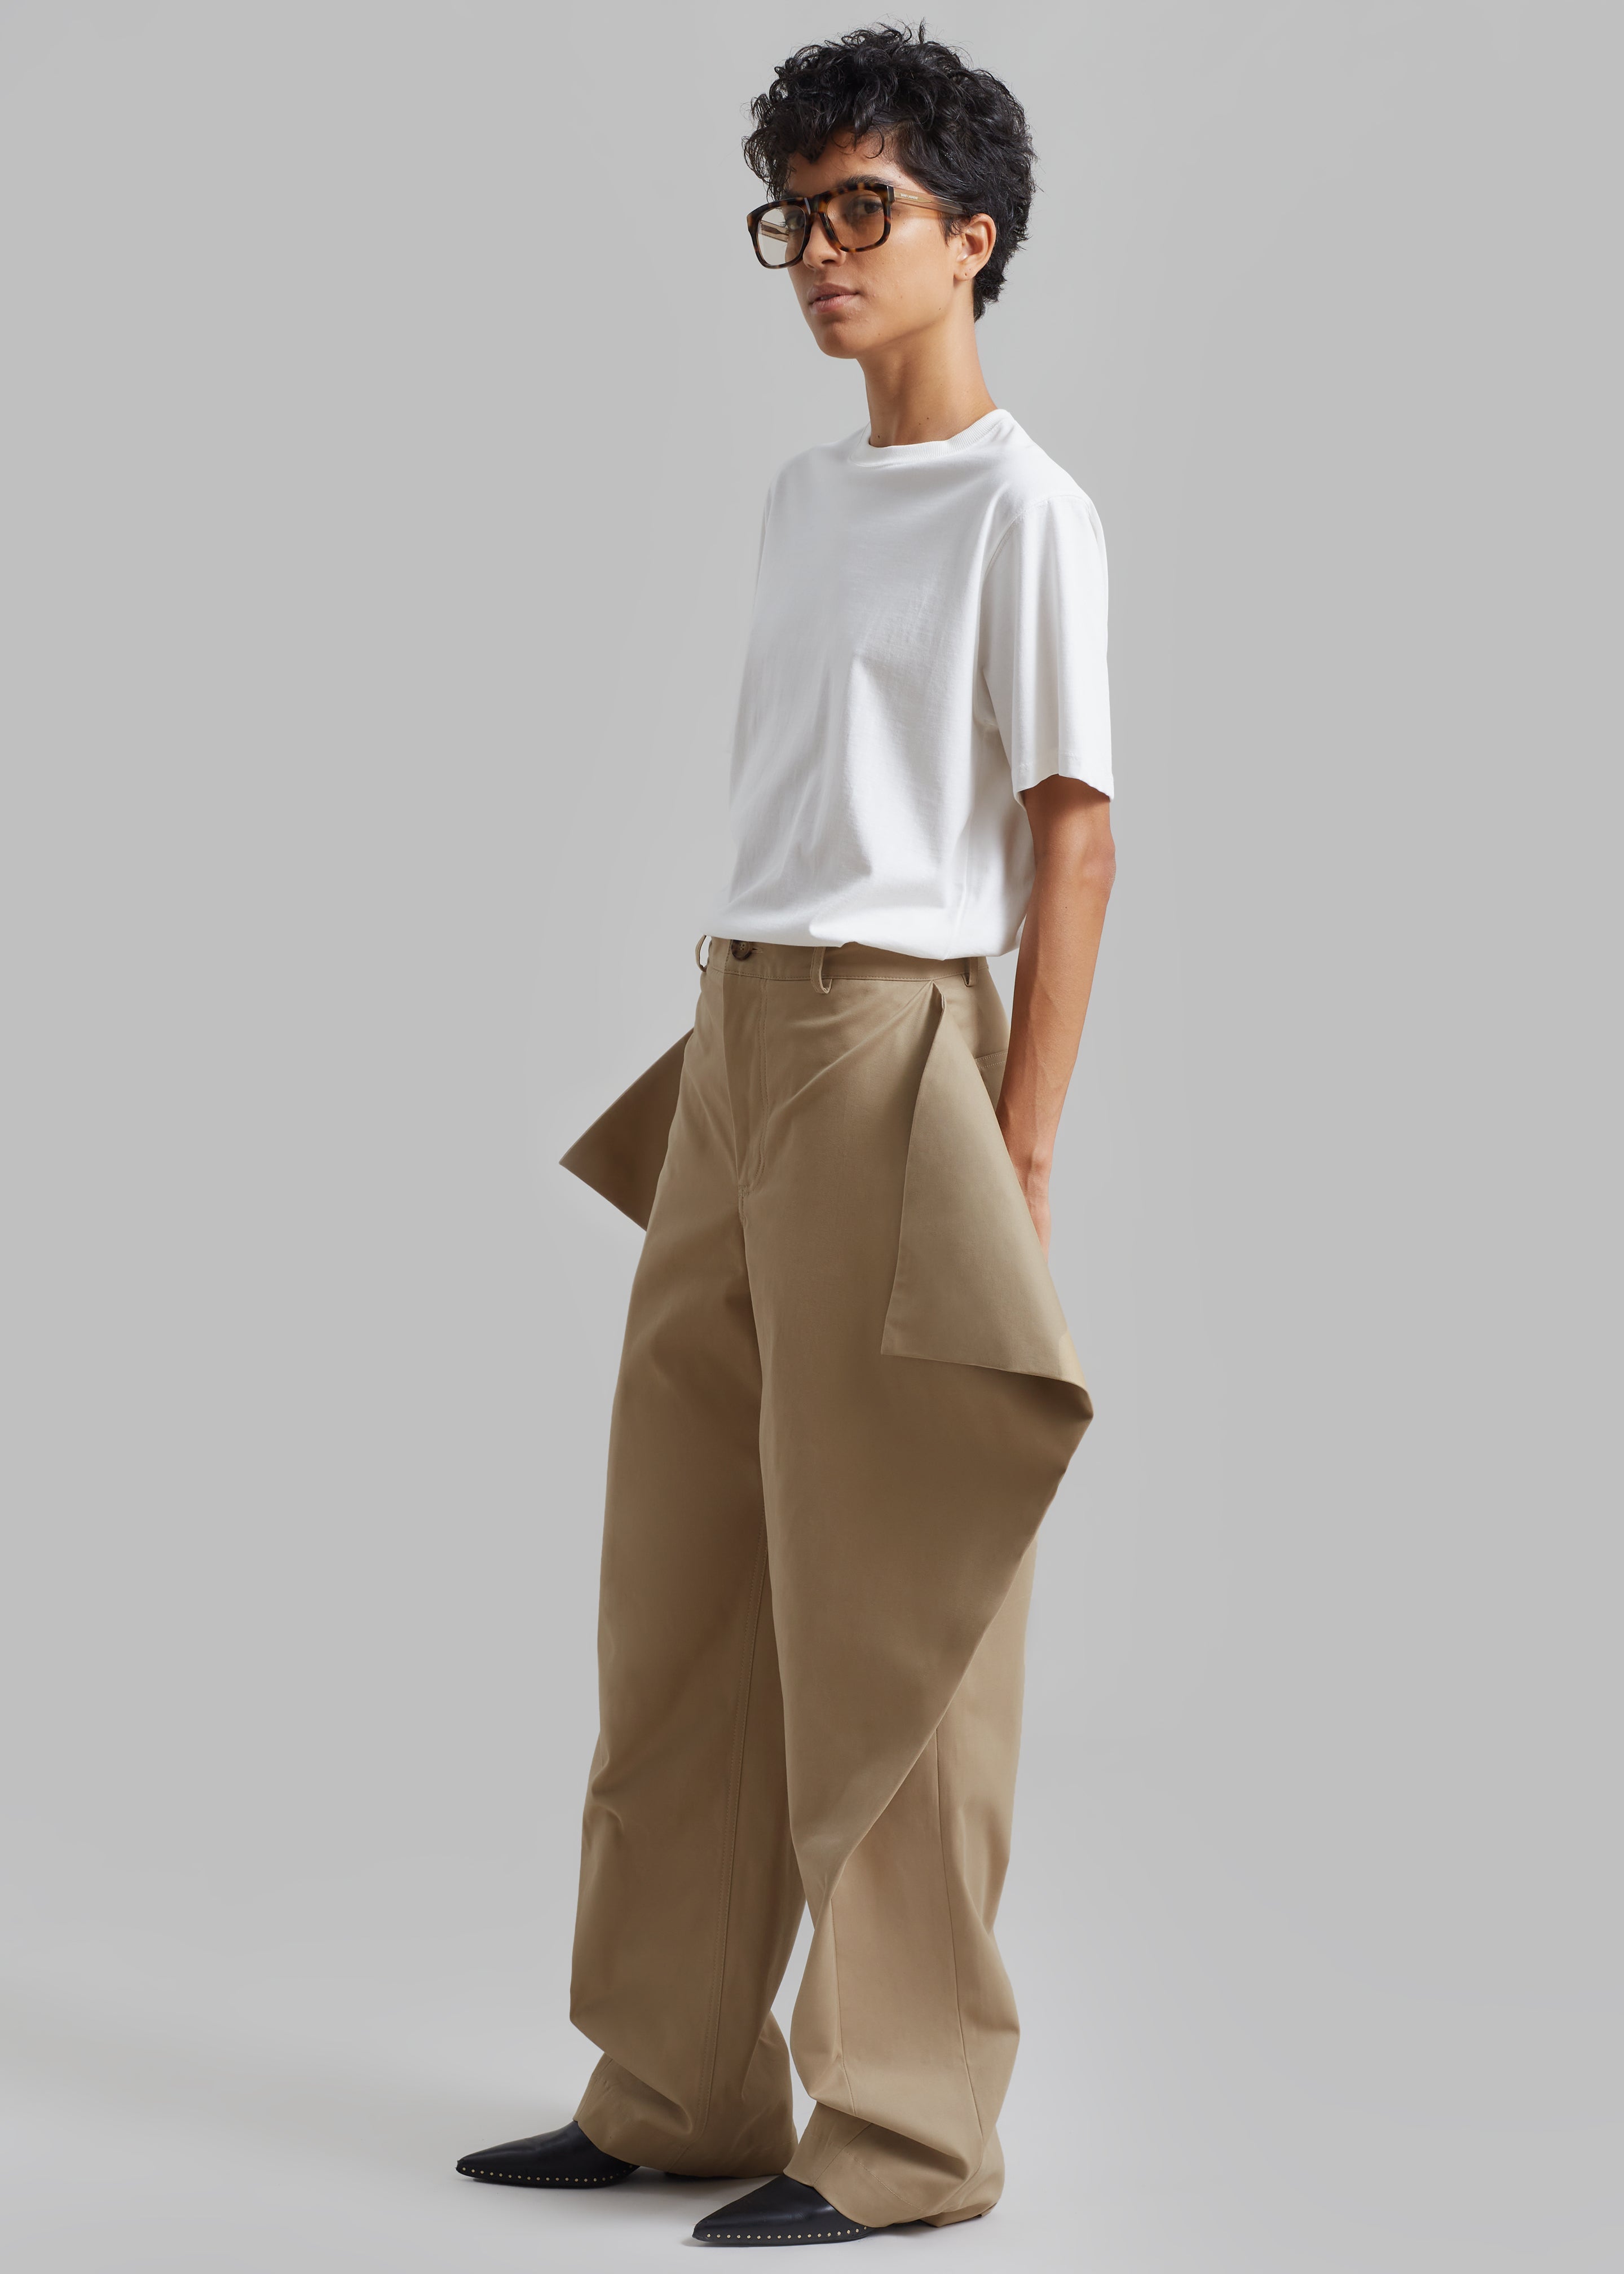 JW Anderson Kite Trousers - Flax - 3